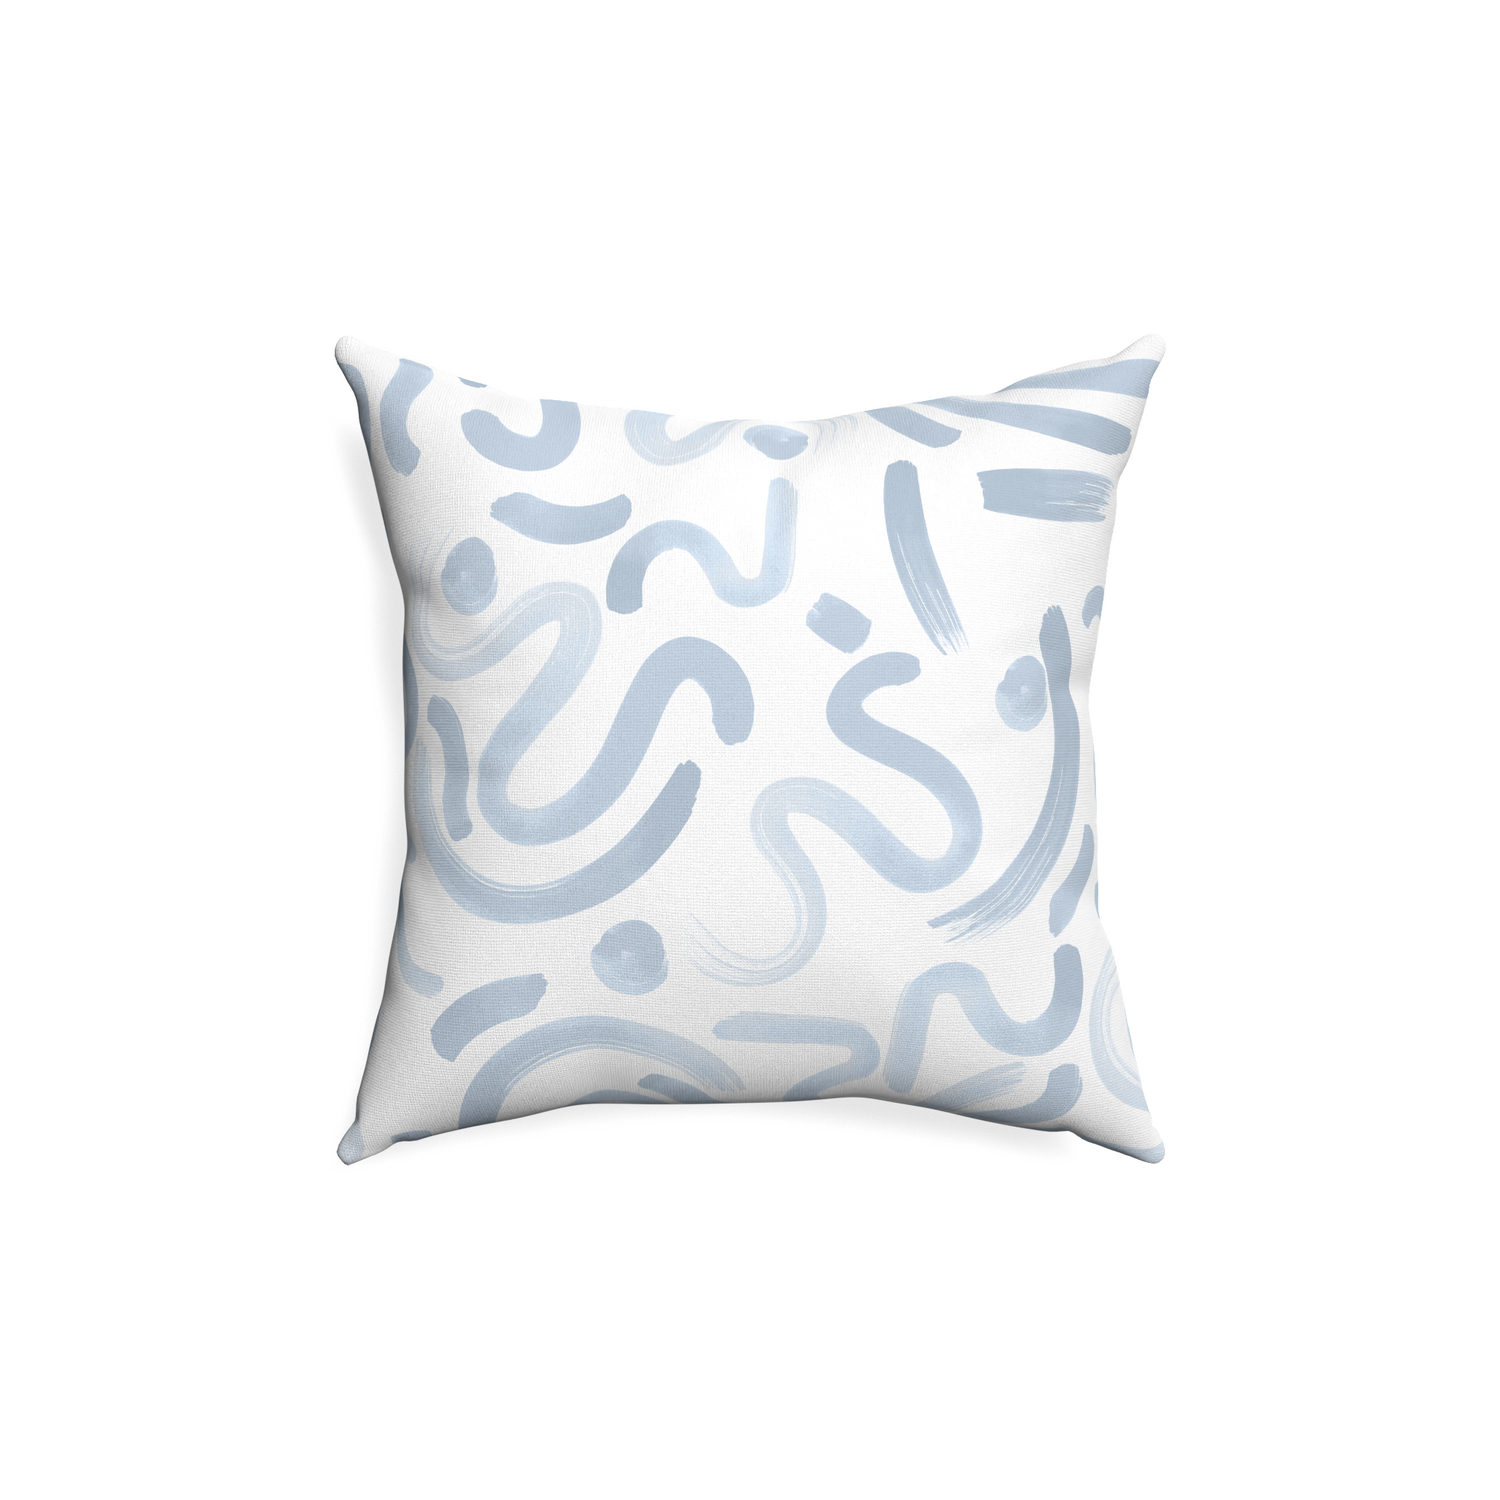 18-square hockney sky custom pillow with none on white background